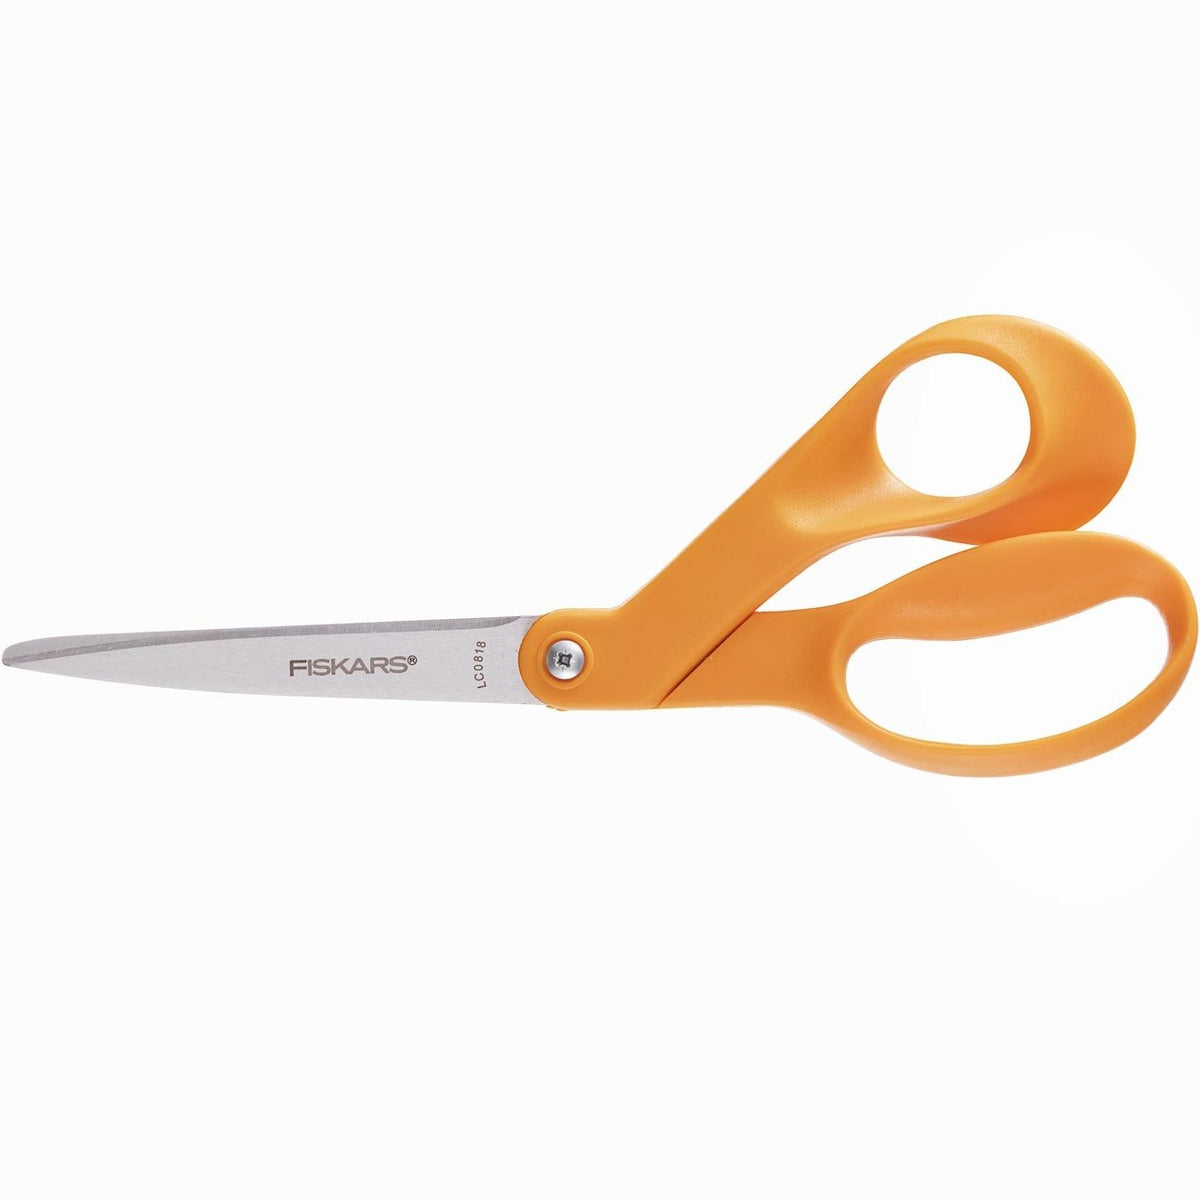 UBRAND METALLIC GOLD 8 STAINLESS STEEL SCISSORS FOR DESK,OFFICE-GREAT  QUALITY